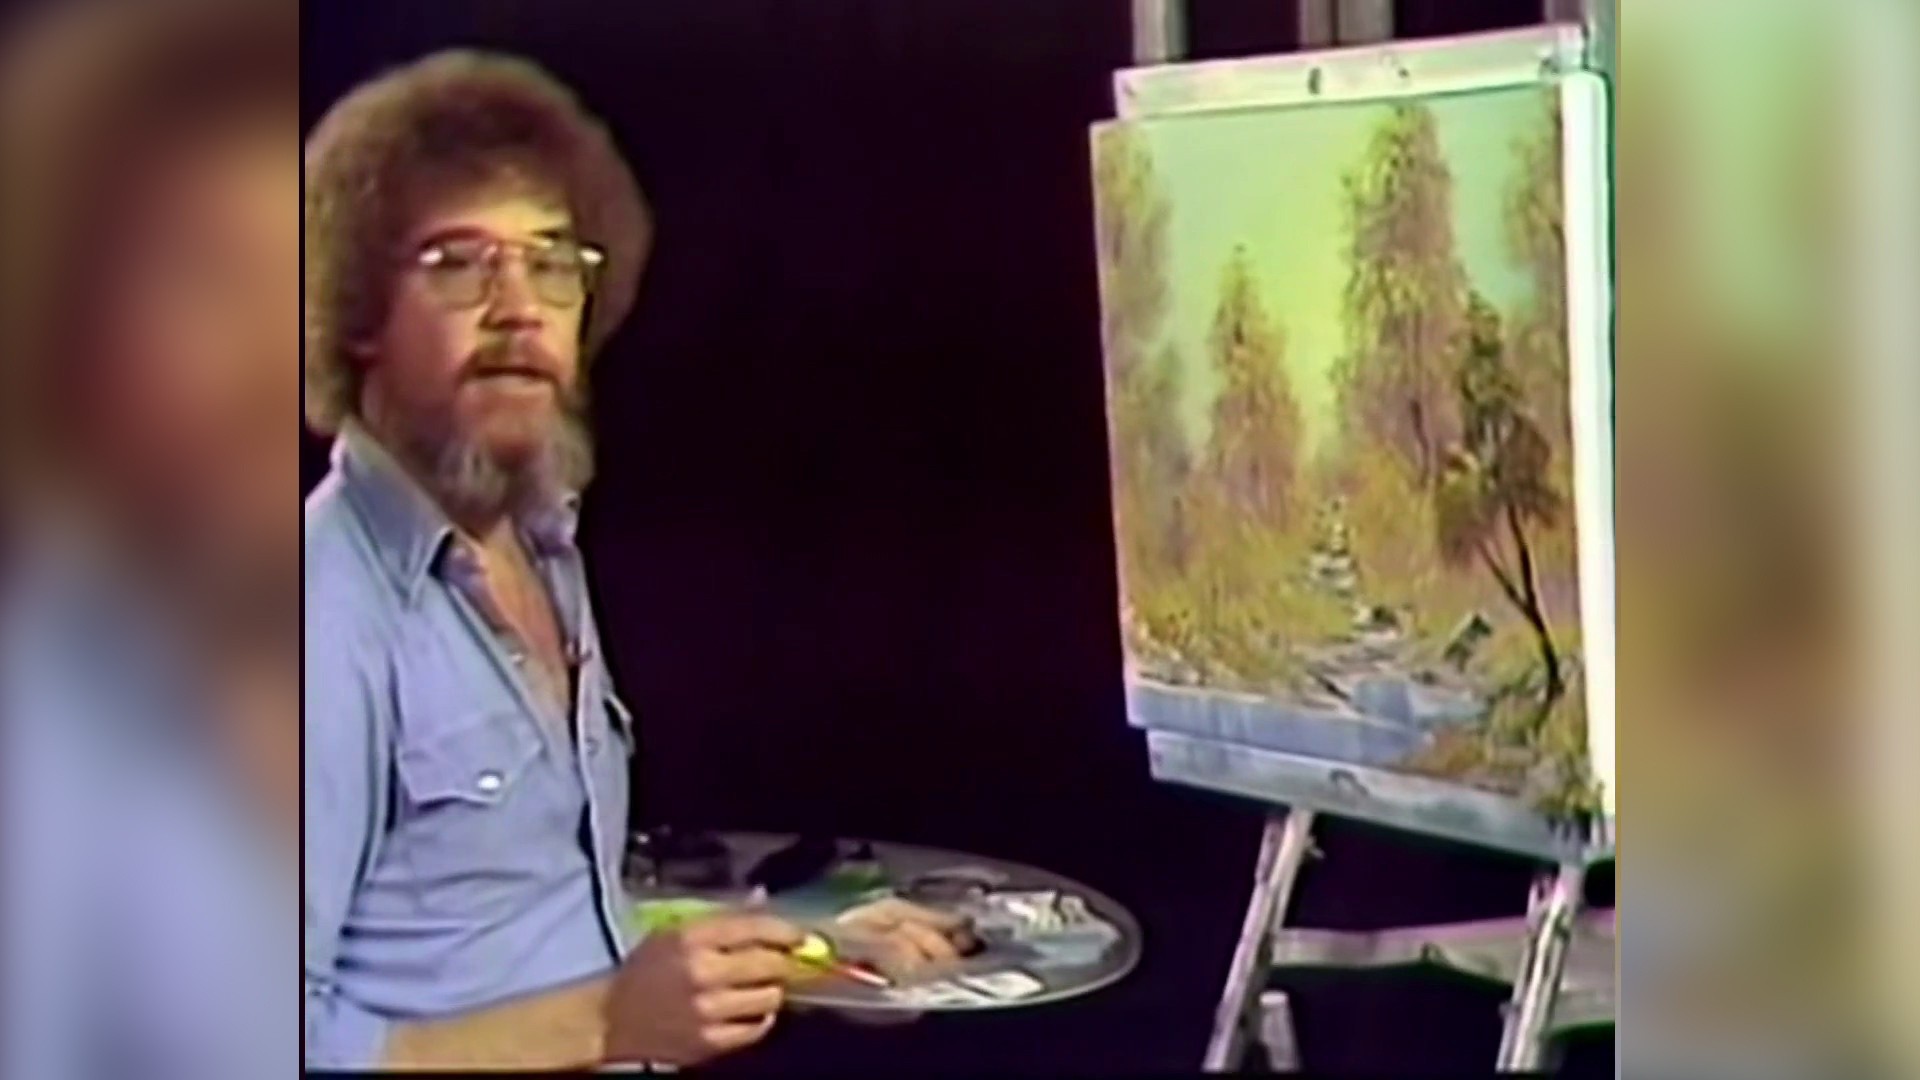 Bob Ross' first painting on his TV show is on sale for nearly $10M